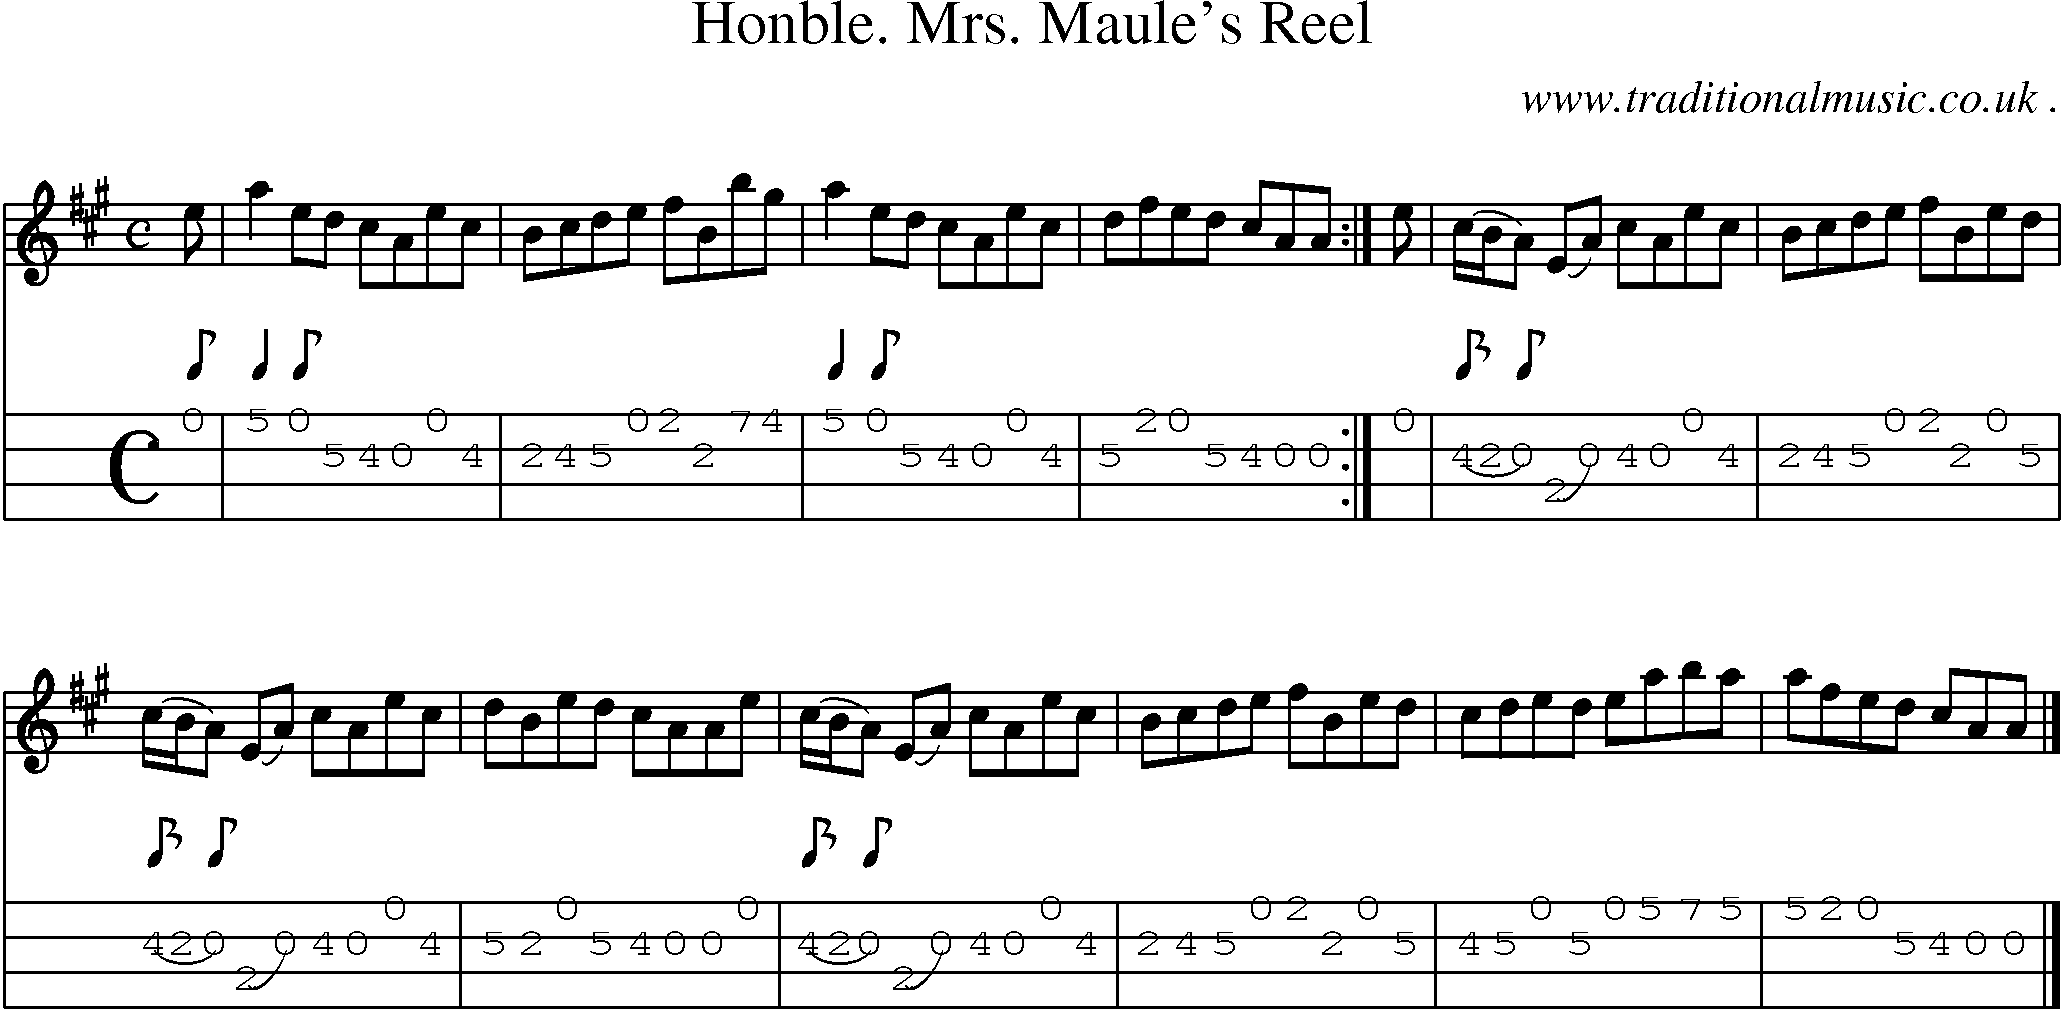 Sheet-music  score, Chords and Mandolin Tabs for Honble Mrs Maules Reel